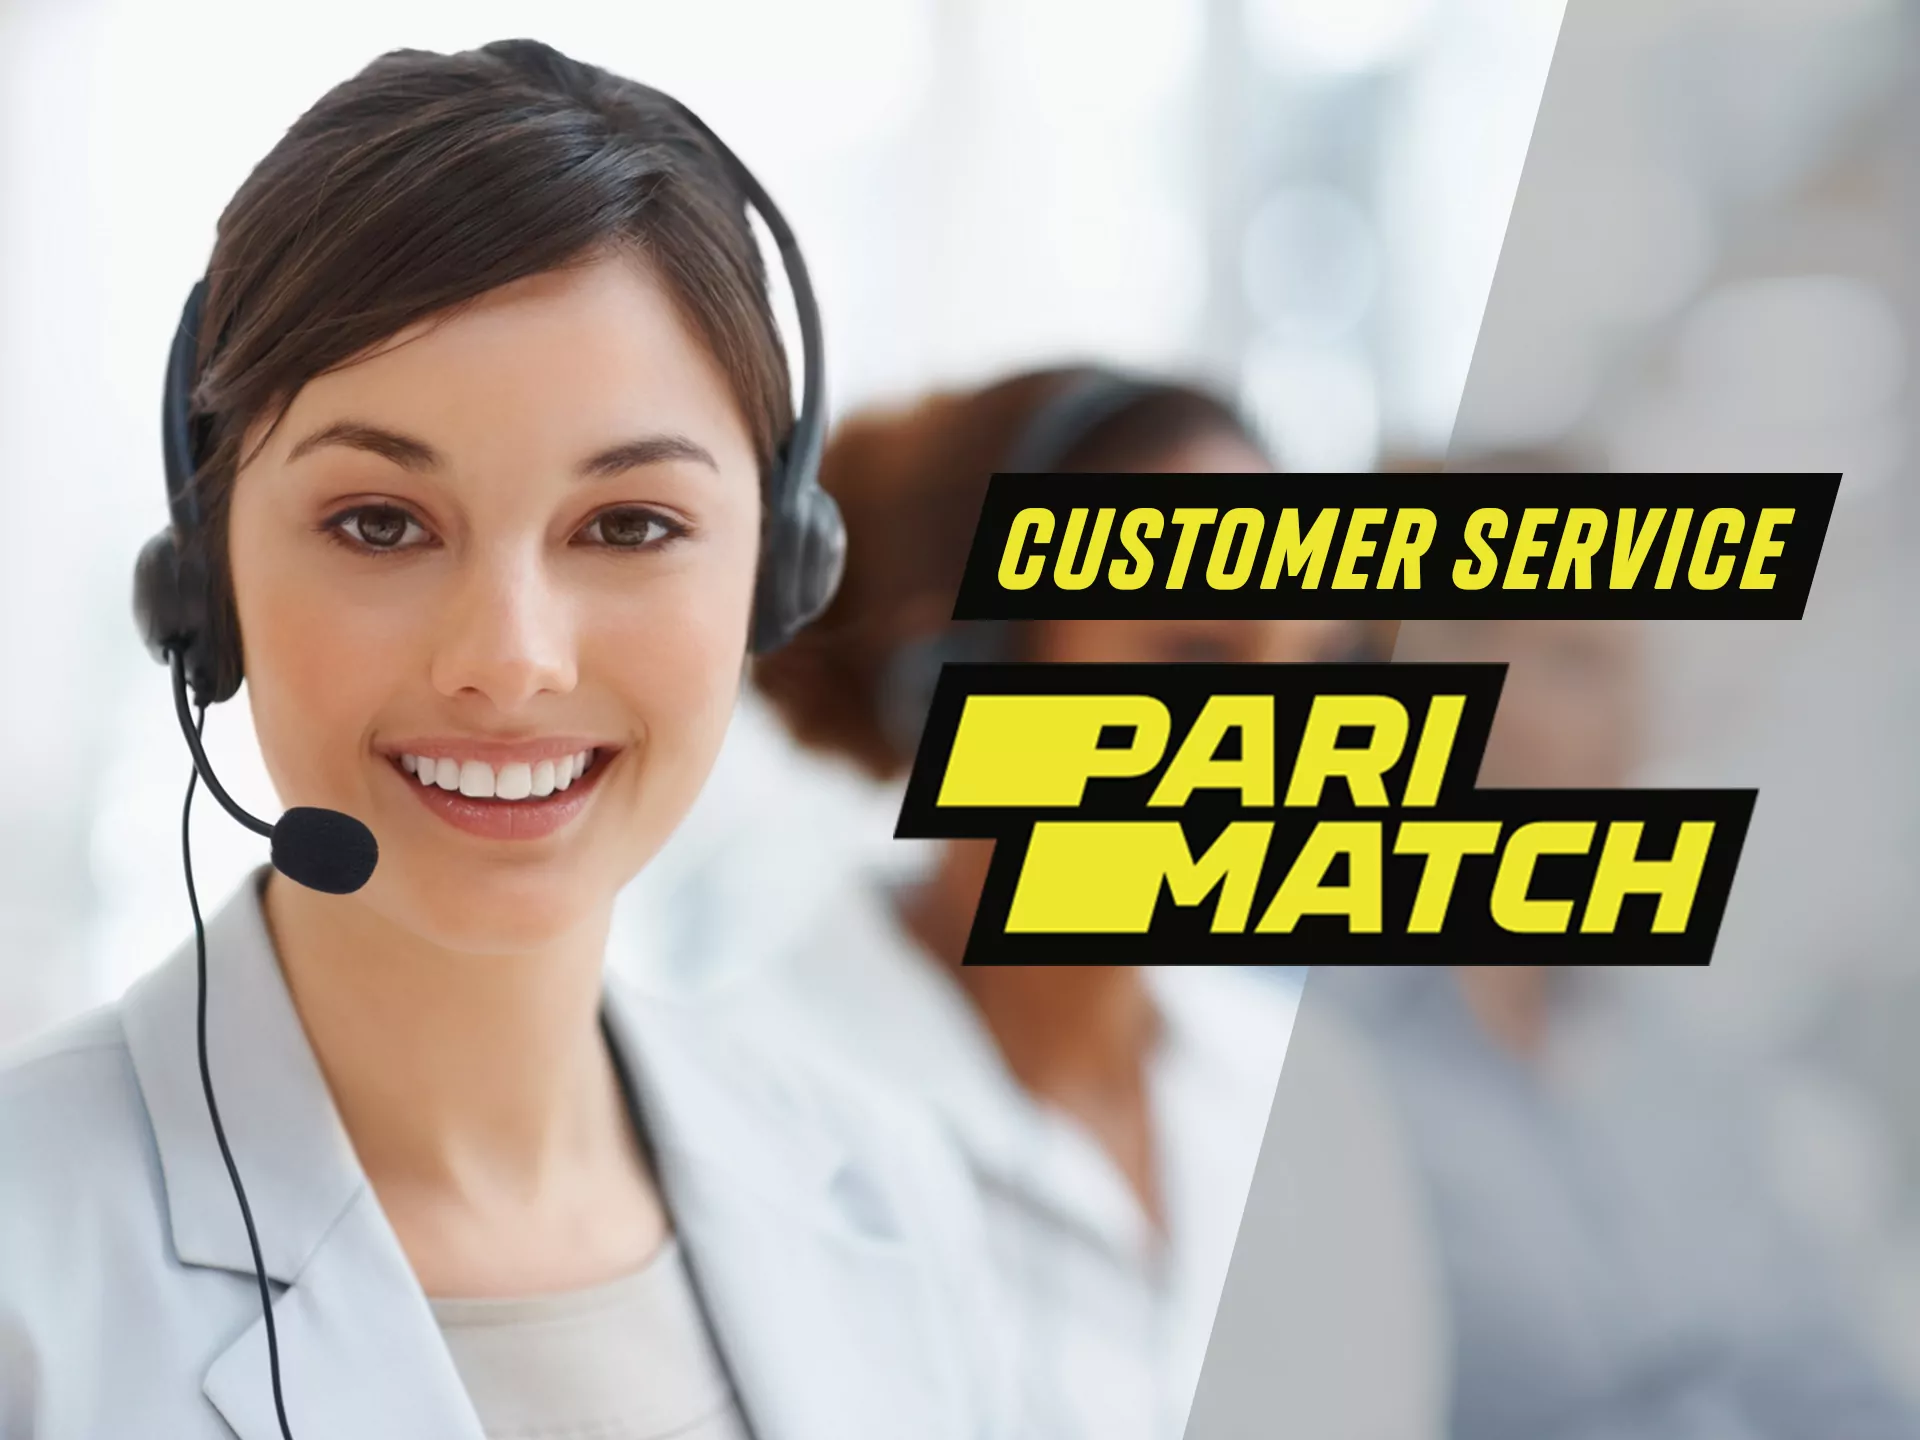 If you have troubles with betting at Parimatch call for help.